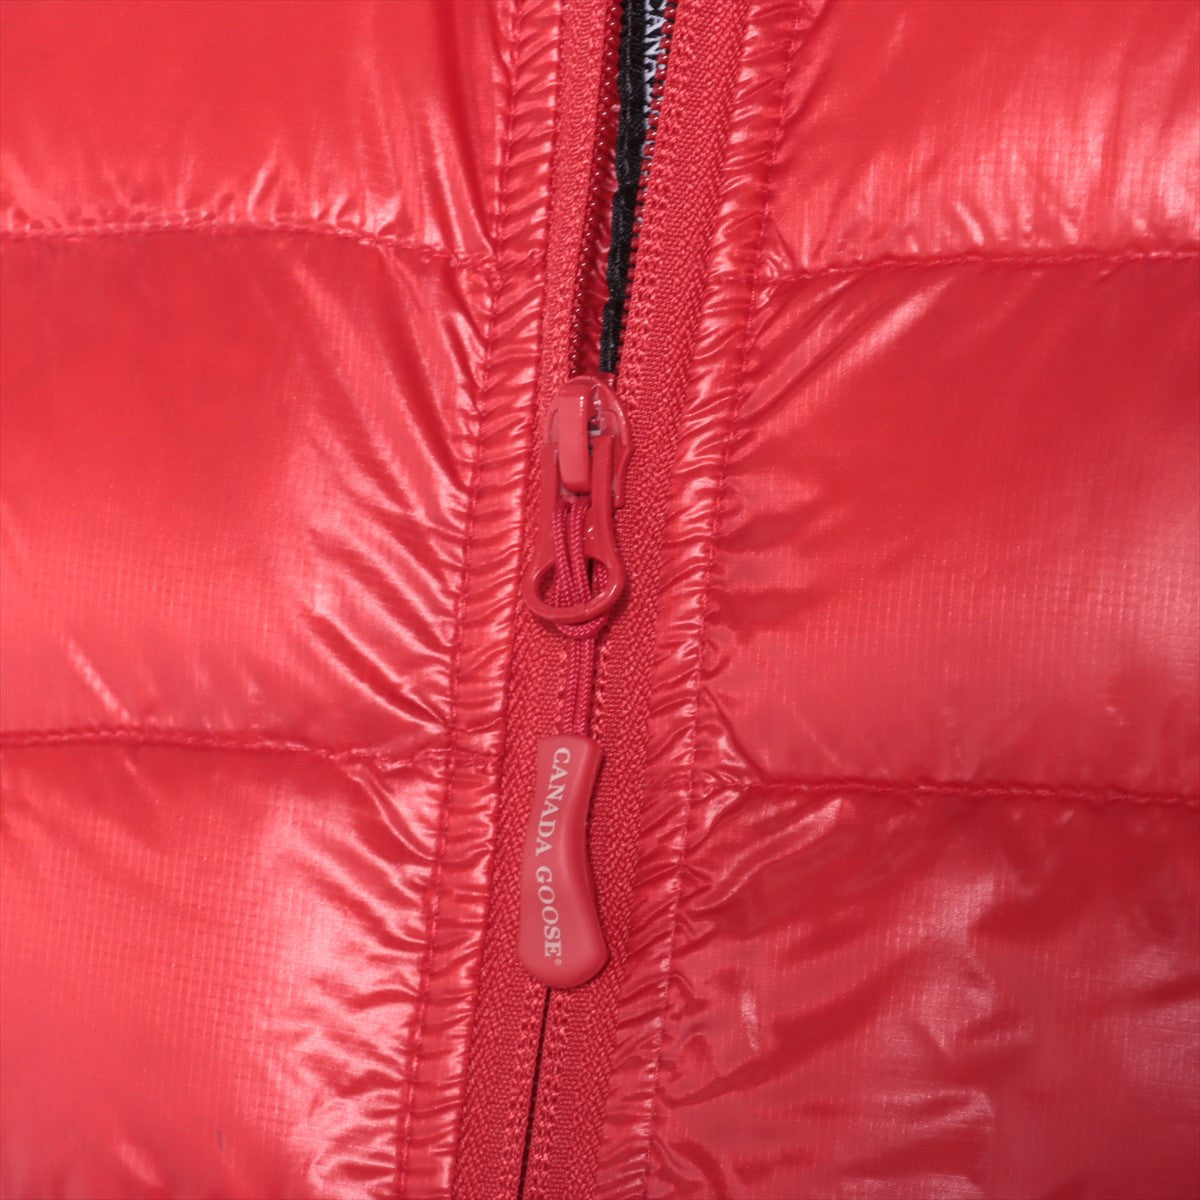 Canada Goose Polyester & nylon Down jacket S Men's Red  2701M Sotheby HYBRIDGE LITE JACKET There is dirt on the cuff